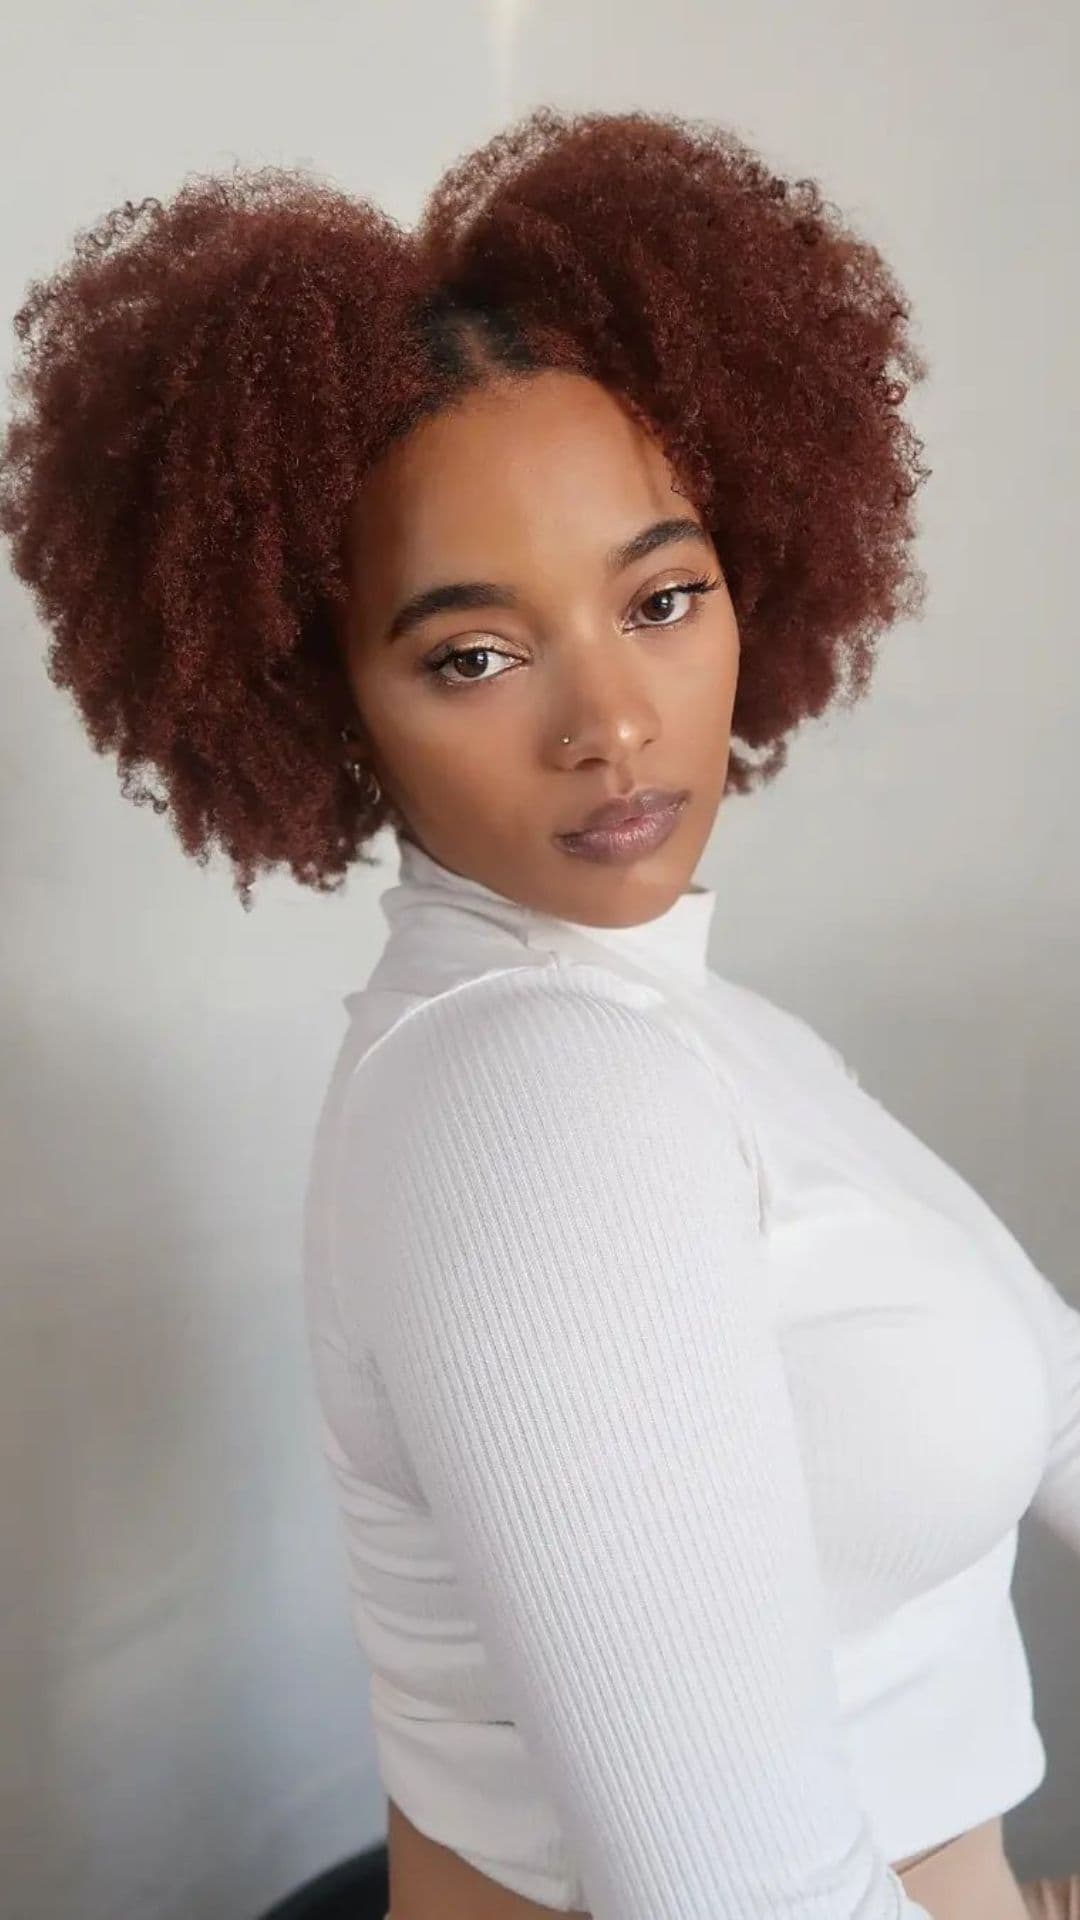 A woman with a textured natural hair.